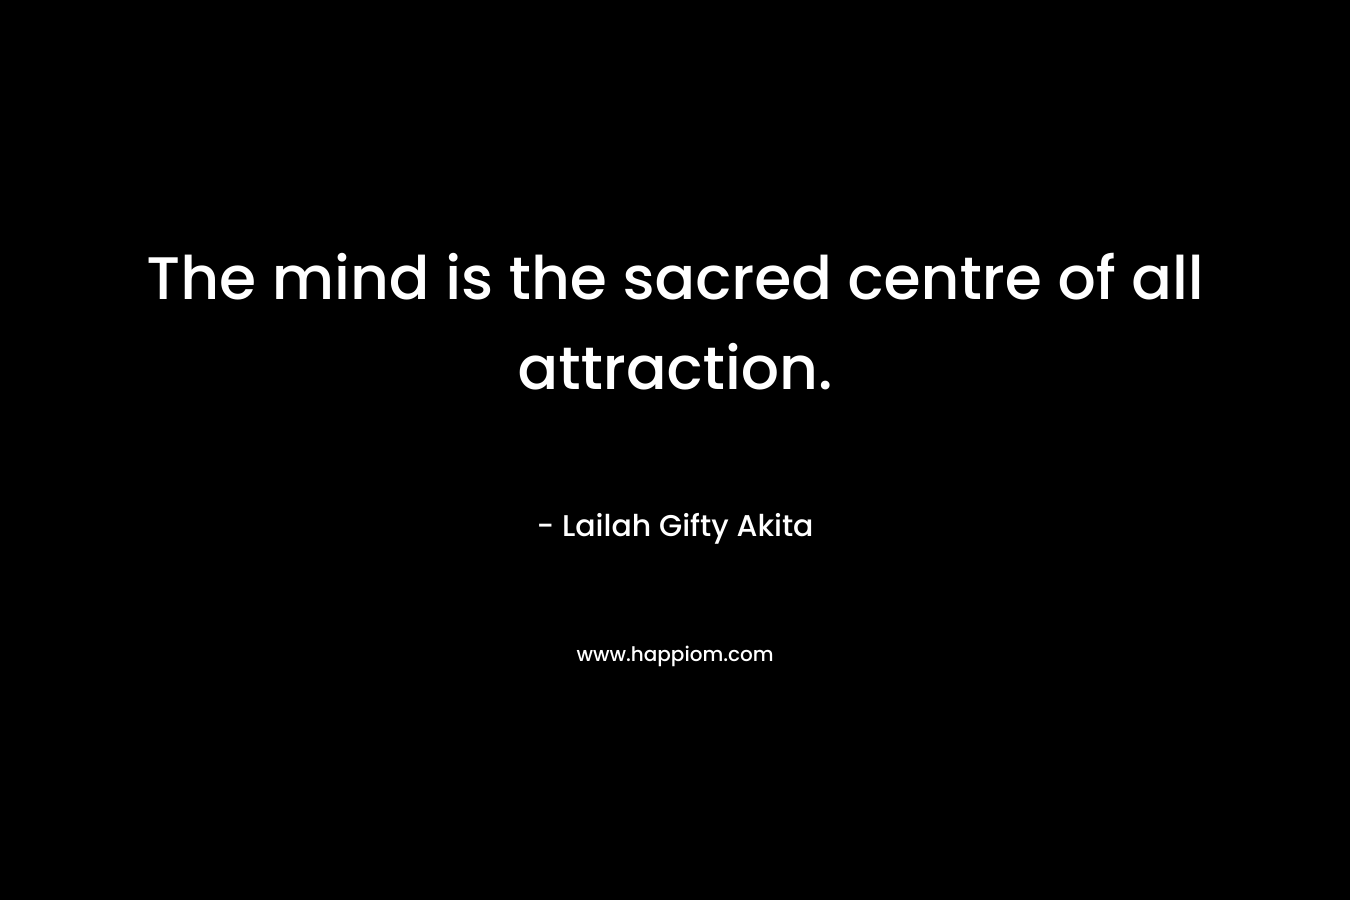 The mind is the sacred centre of all attraction.